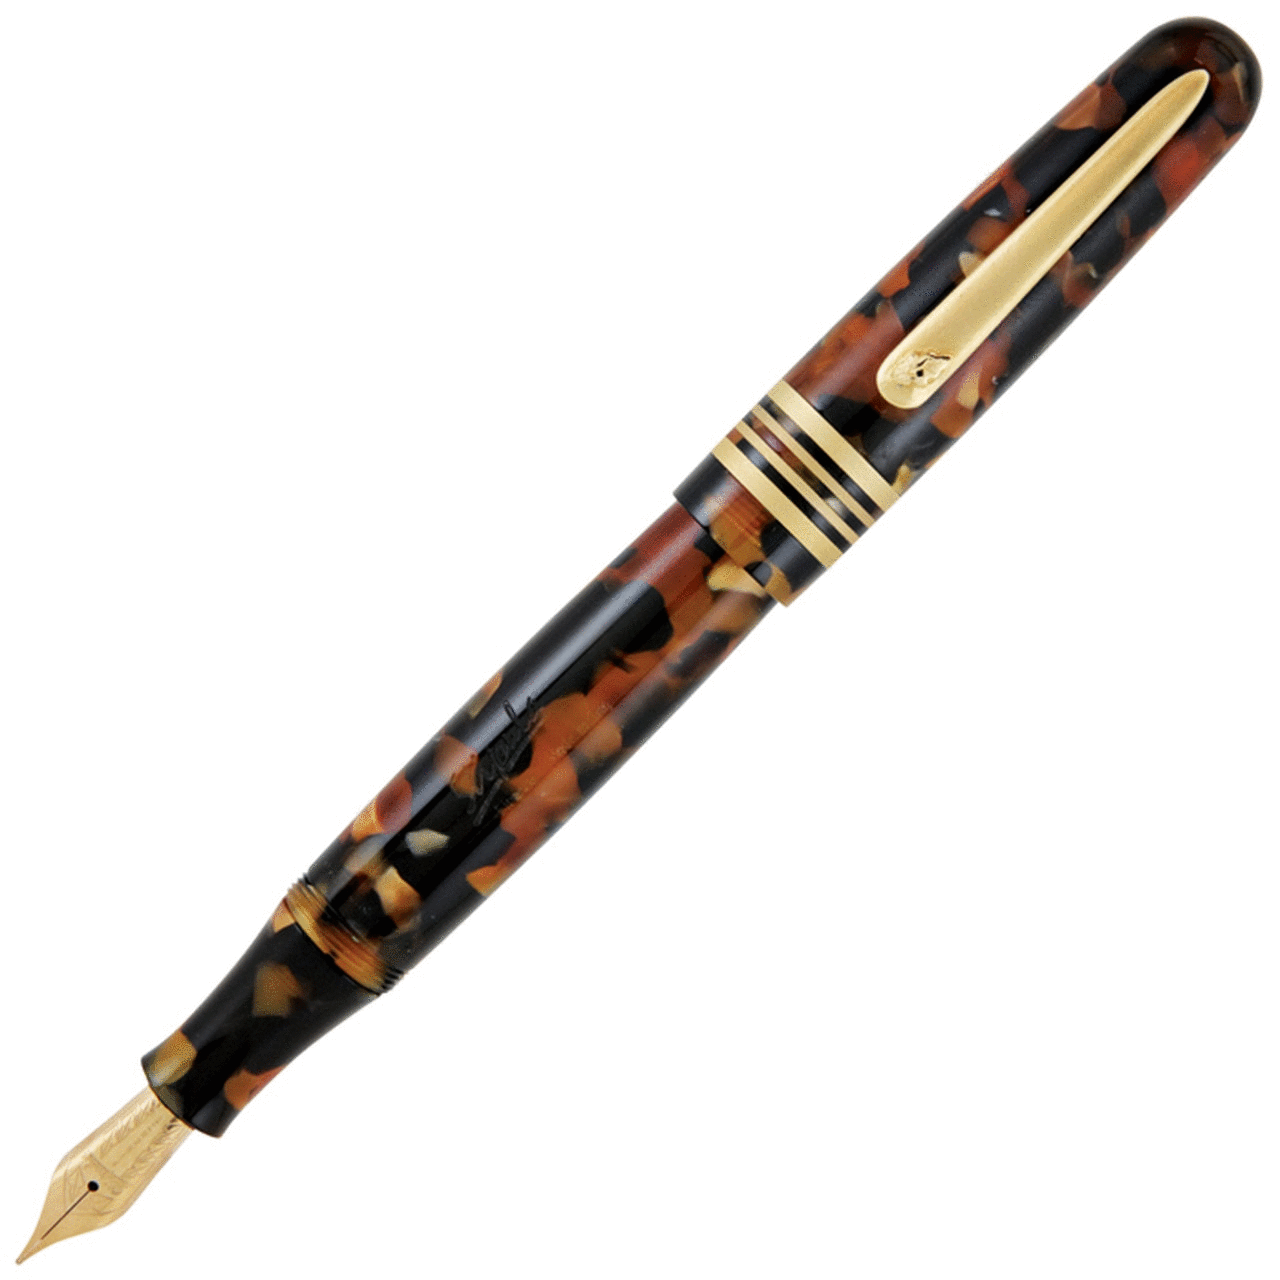 Stipula pens made in Florence  Italy since the 1930s.  These hand-crafted Stipula pens have a stylish look and feel that is based on the company's long tradition of producing writing instruments